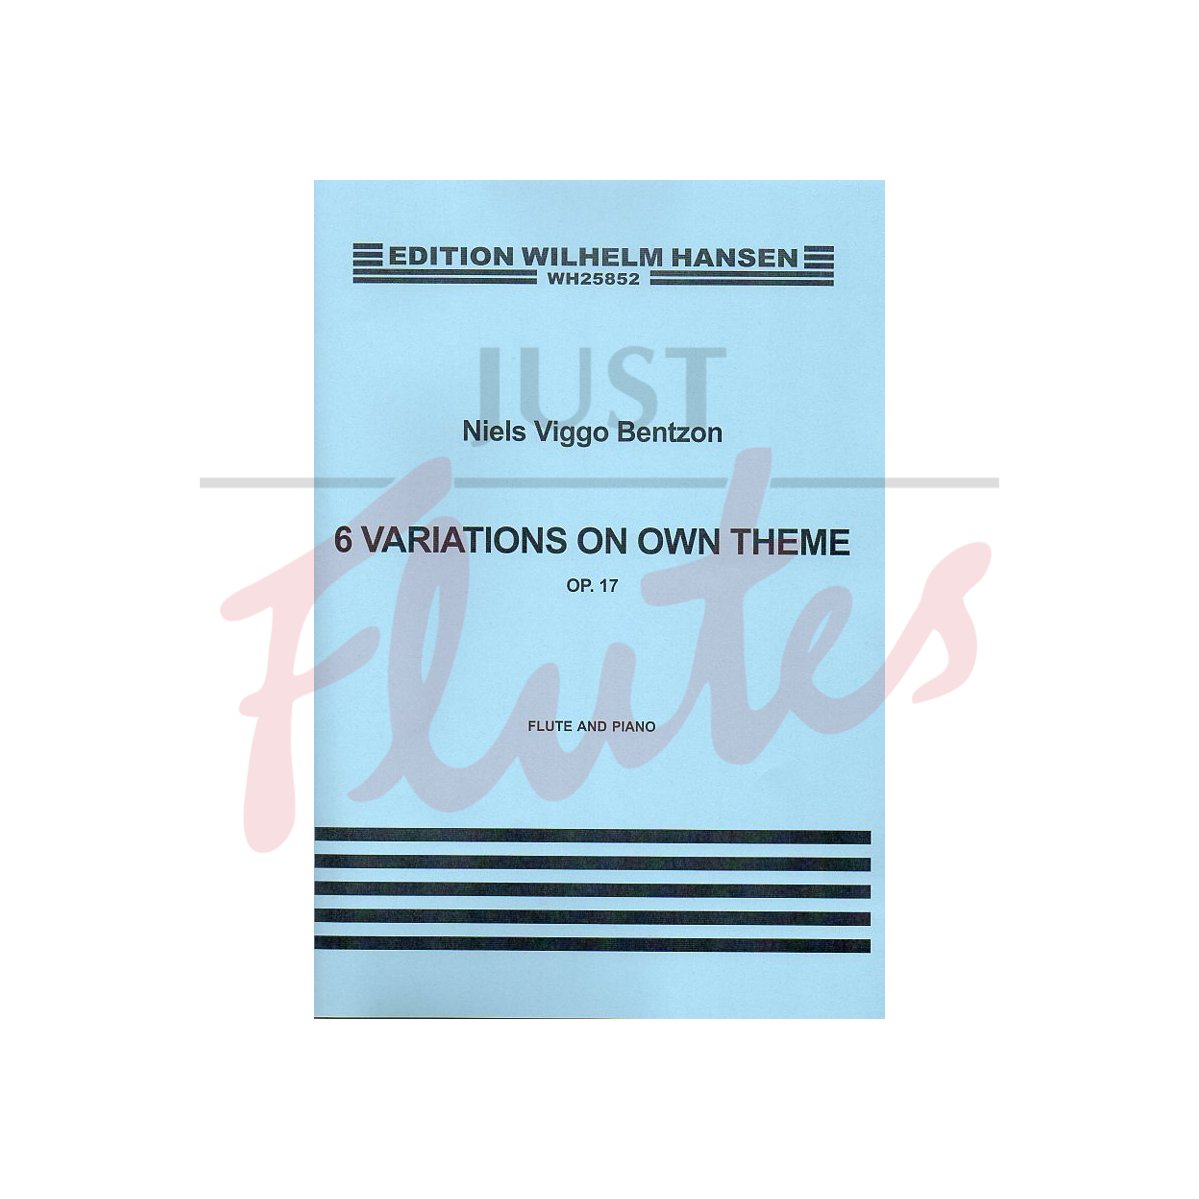 6 Variations on Own Theme for Flute and Piano